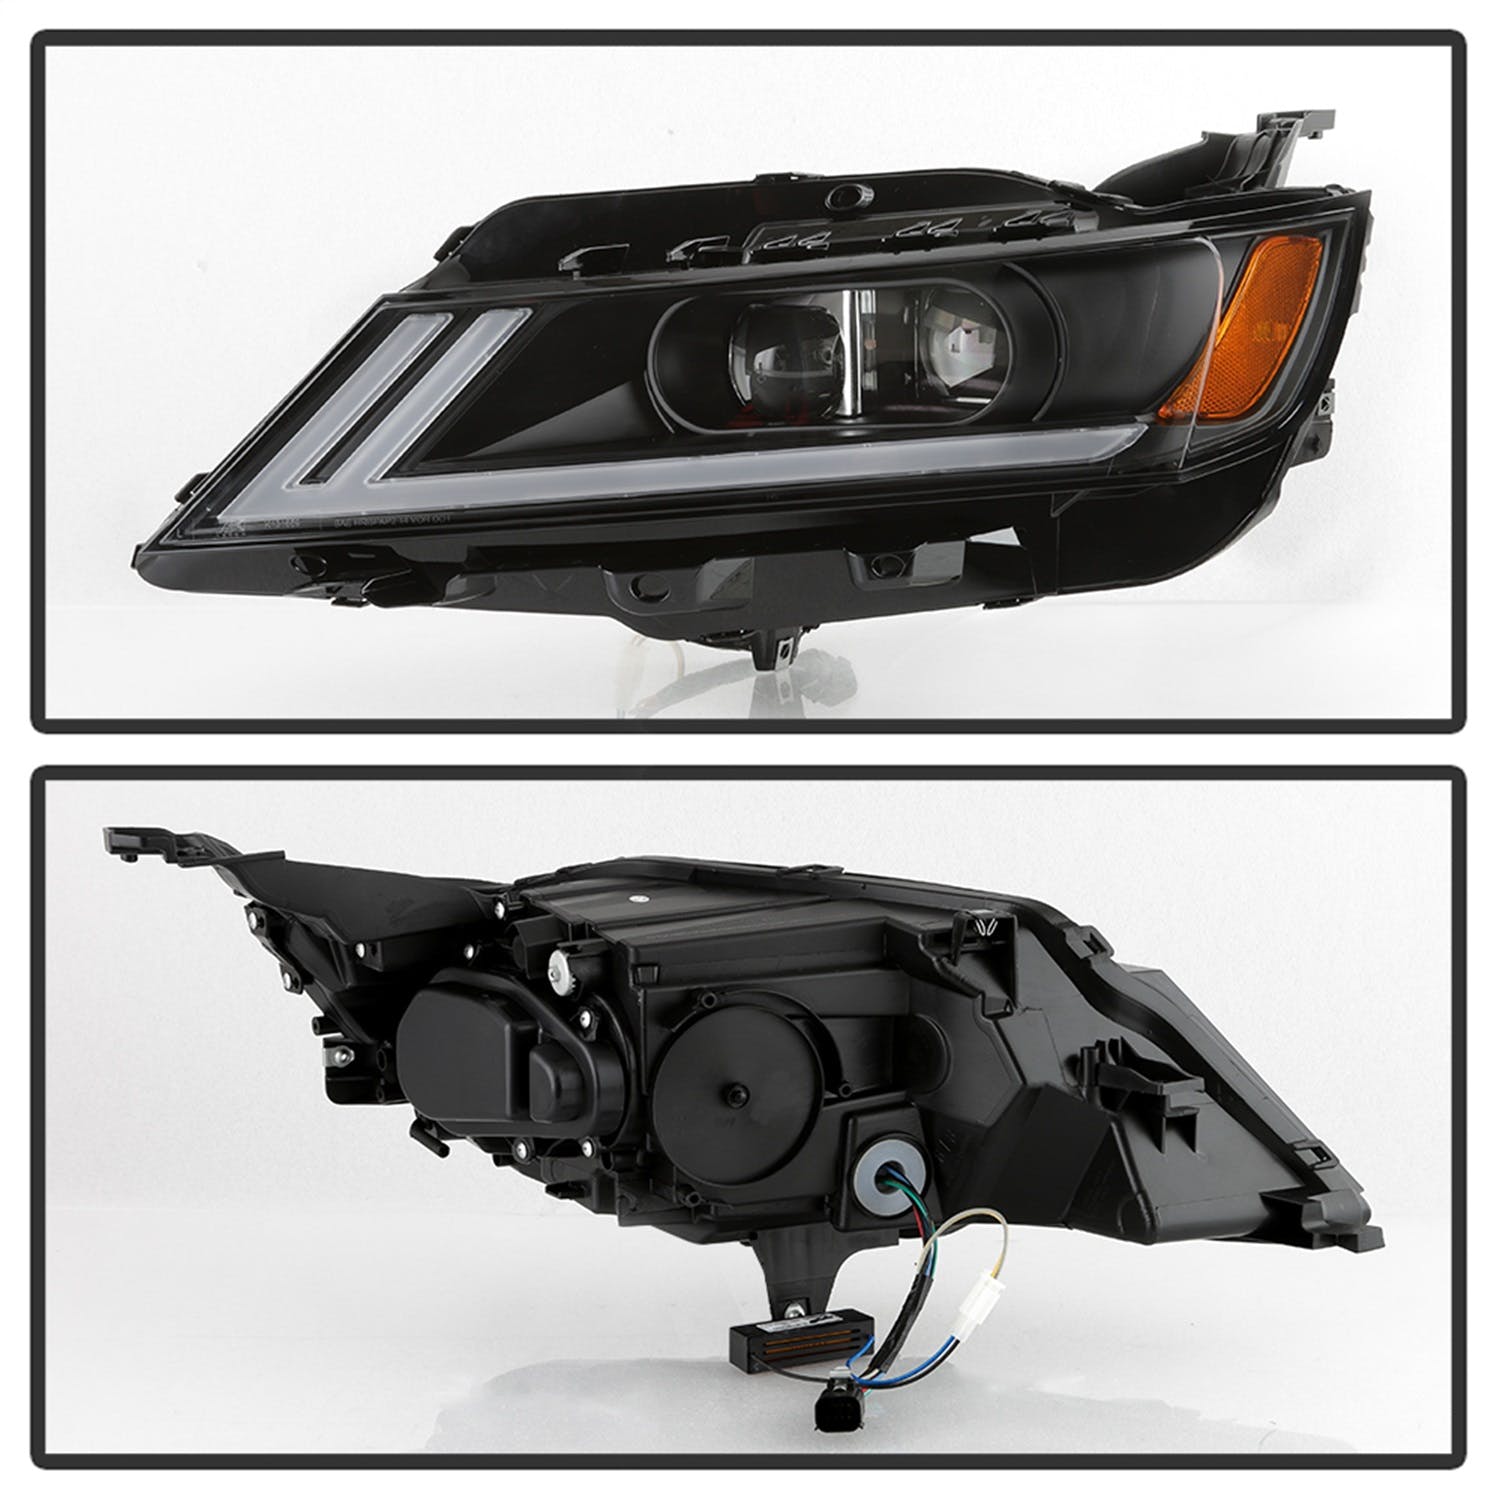 XTUNE POWER 9042874 Chevy Impala 2014 2019 Halogen Models Only ( Does Not Fit 14 16 Limited Models And Xenon HID Models ) DRL Light Bar Projector Headlights Low Beam H7(Included) ; High Beam H7(Included) ; Signal LED Black